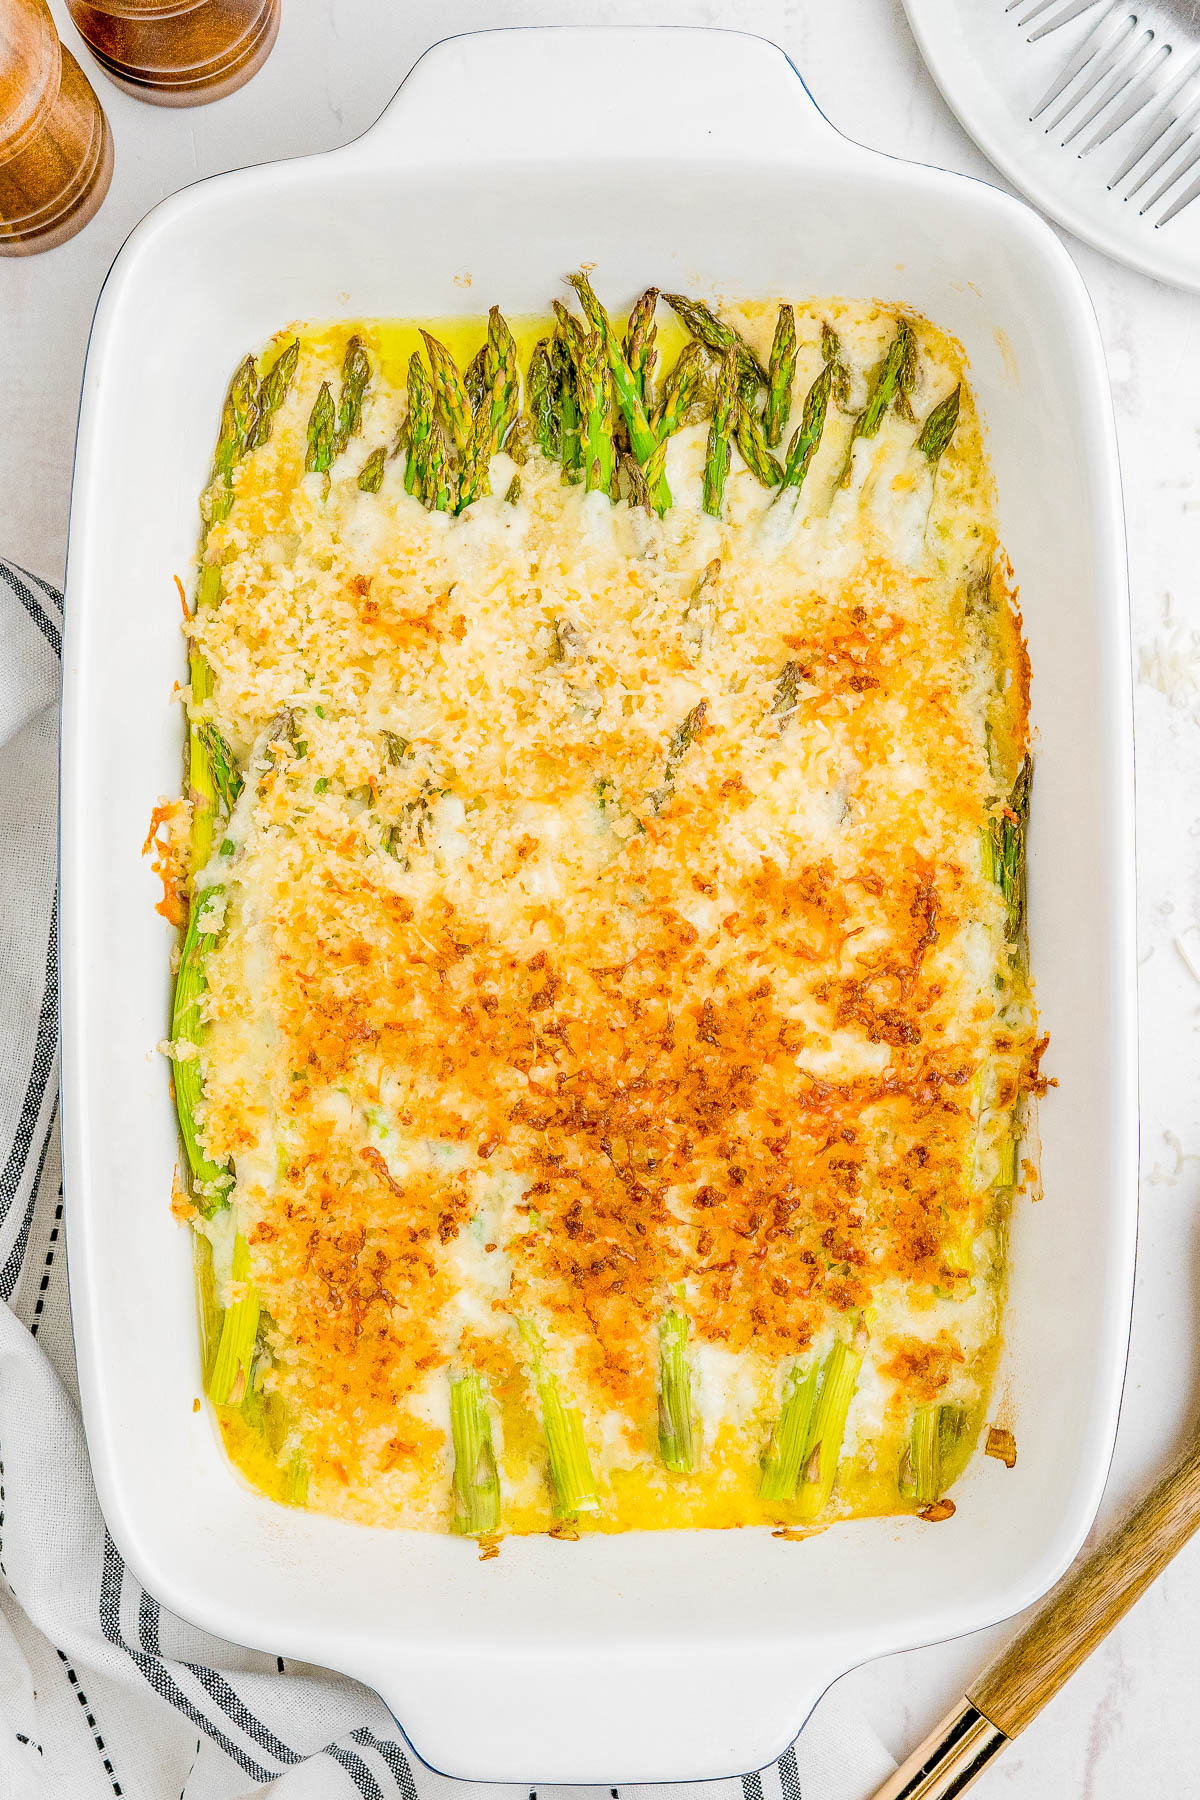 Asparagus Casserole - Smothered in a rich cream sauce, and layered with Parmesan and mozzarella cheeses, along with perfectly crispy breadcrumbs, this will be your new FAVORITE way to eat asparagus! Makes a wonderful holiday side dish from Thanksgiving to Easter, but it's FAST and EASY enough so you can serve it at weeknight dinners!